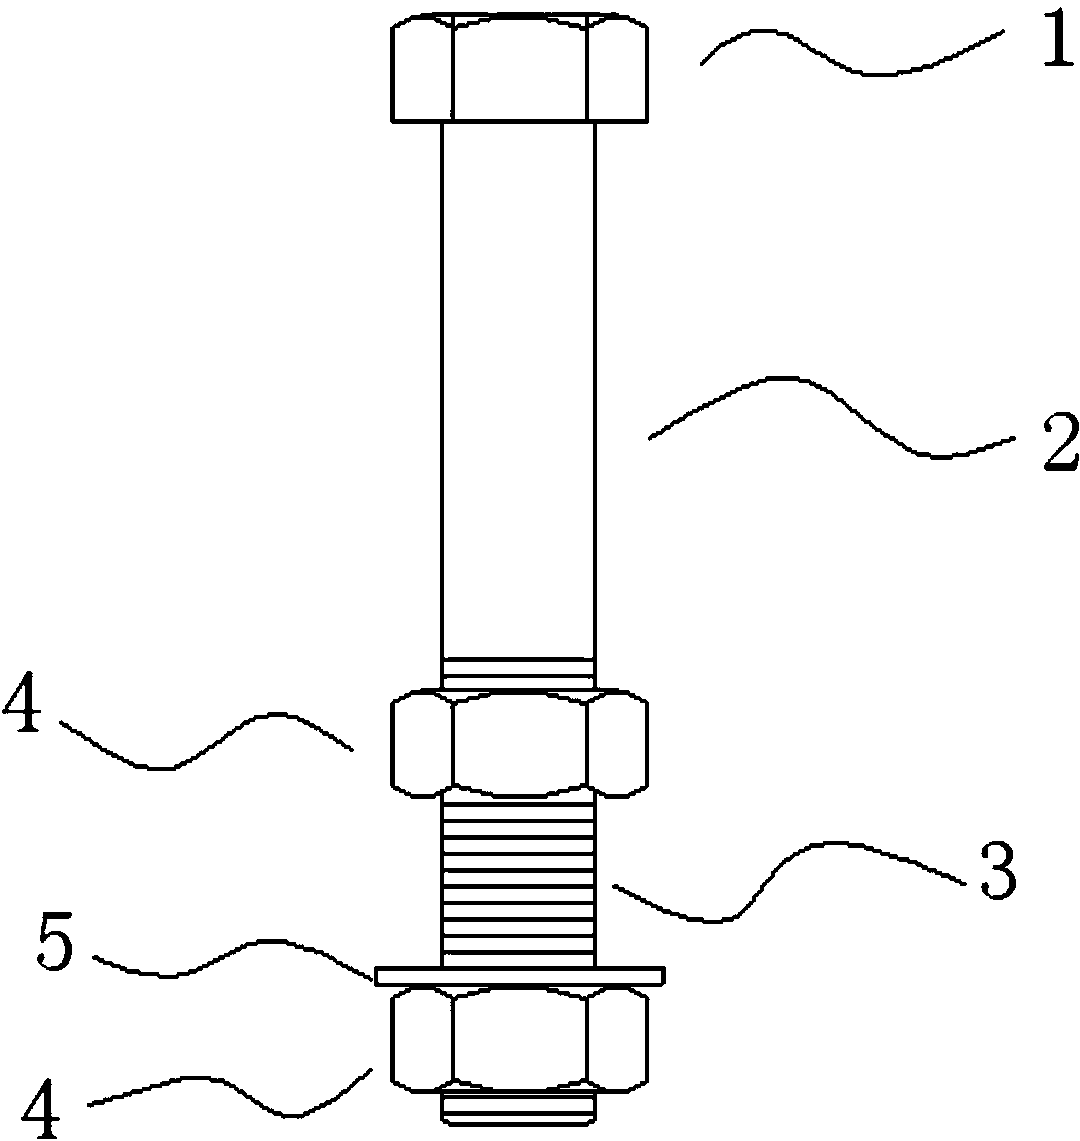 Bolt shear force connecting piece and method for enhancing shear strength by use of spring